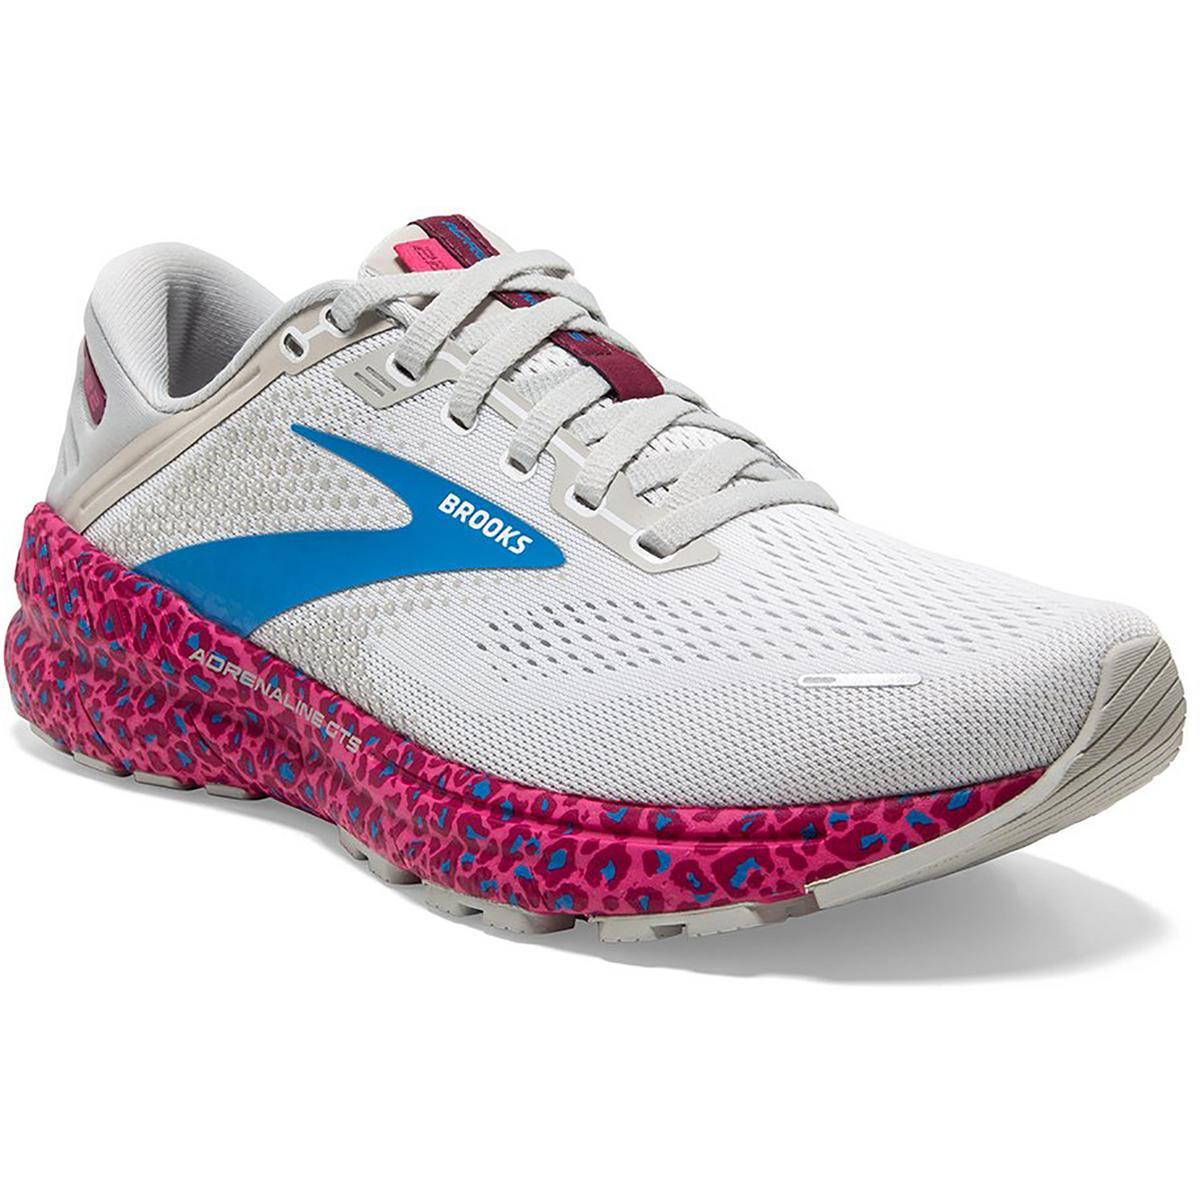 Brooks Womens Adrenaline Gts 22 Athletic and Training Shoes Sneakers Bhfo 7537 White/Oyster/Brilliant